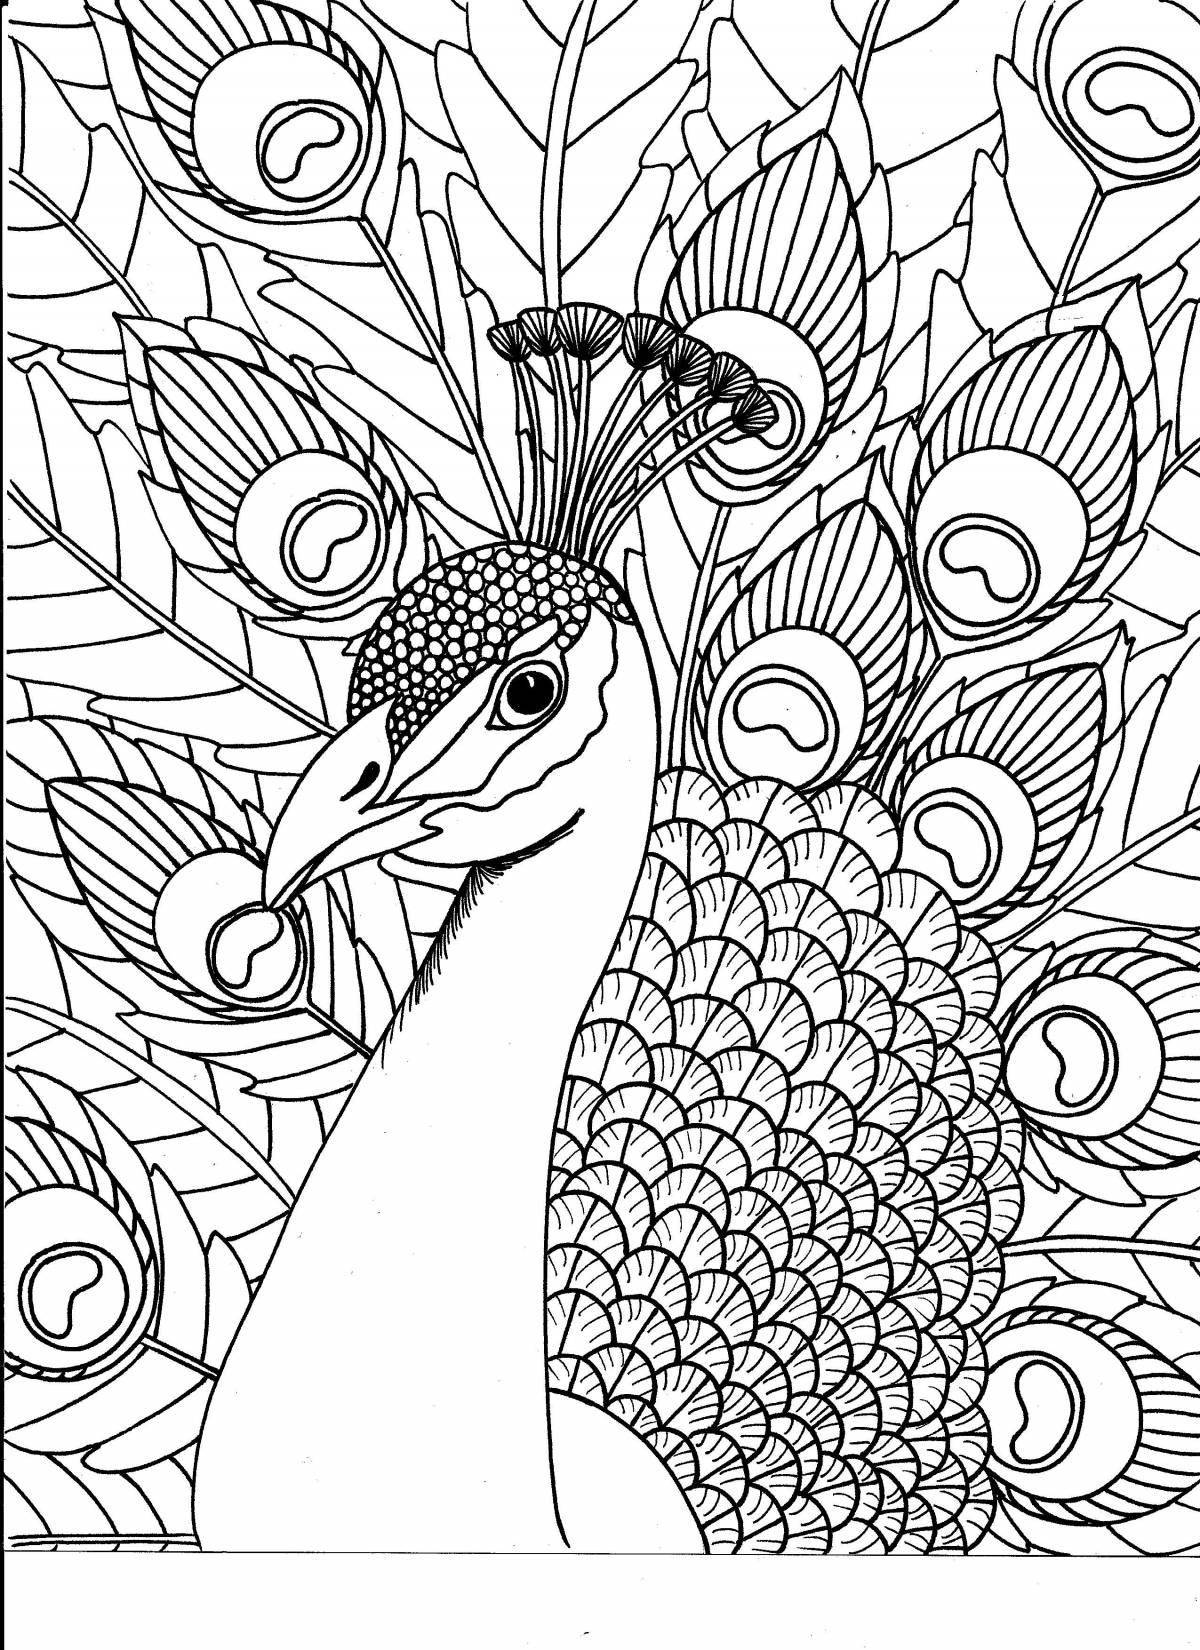 Amazing peacock coloring book